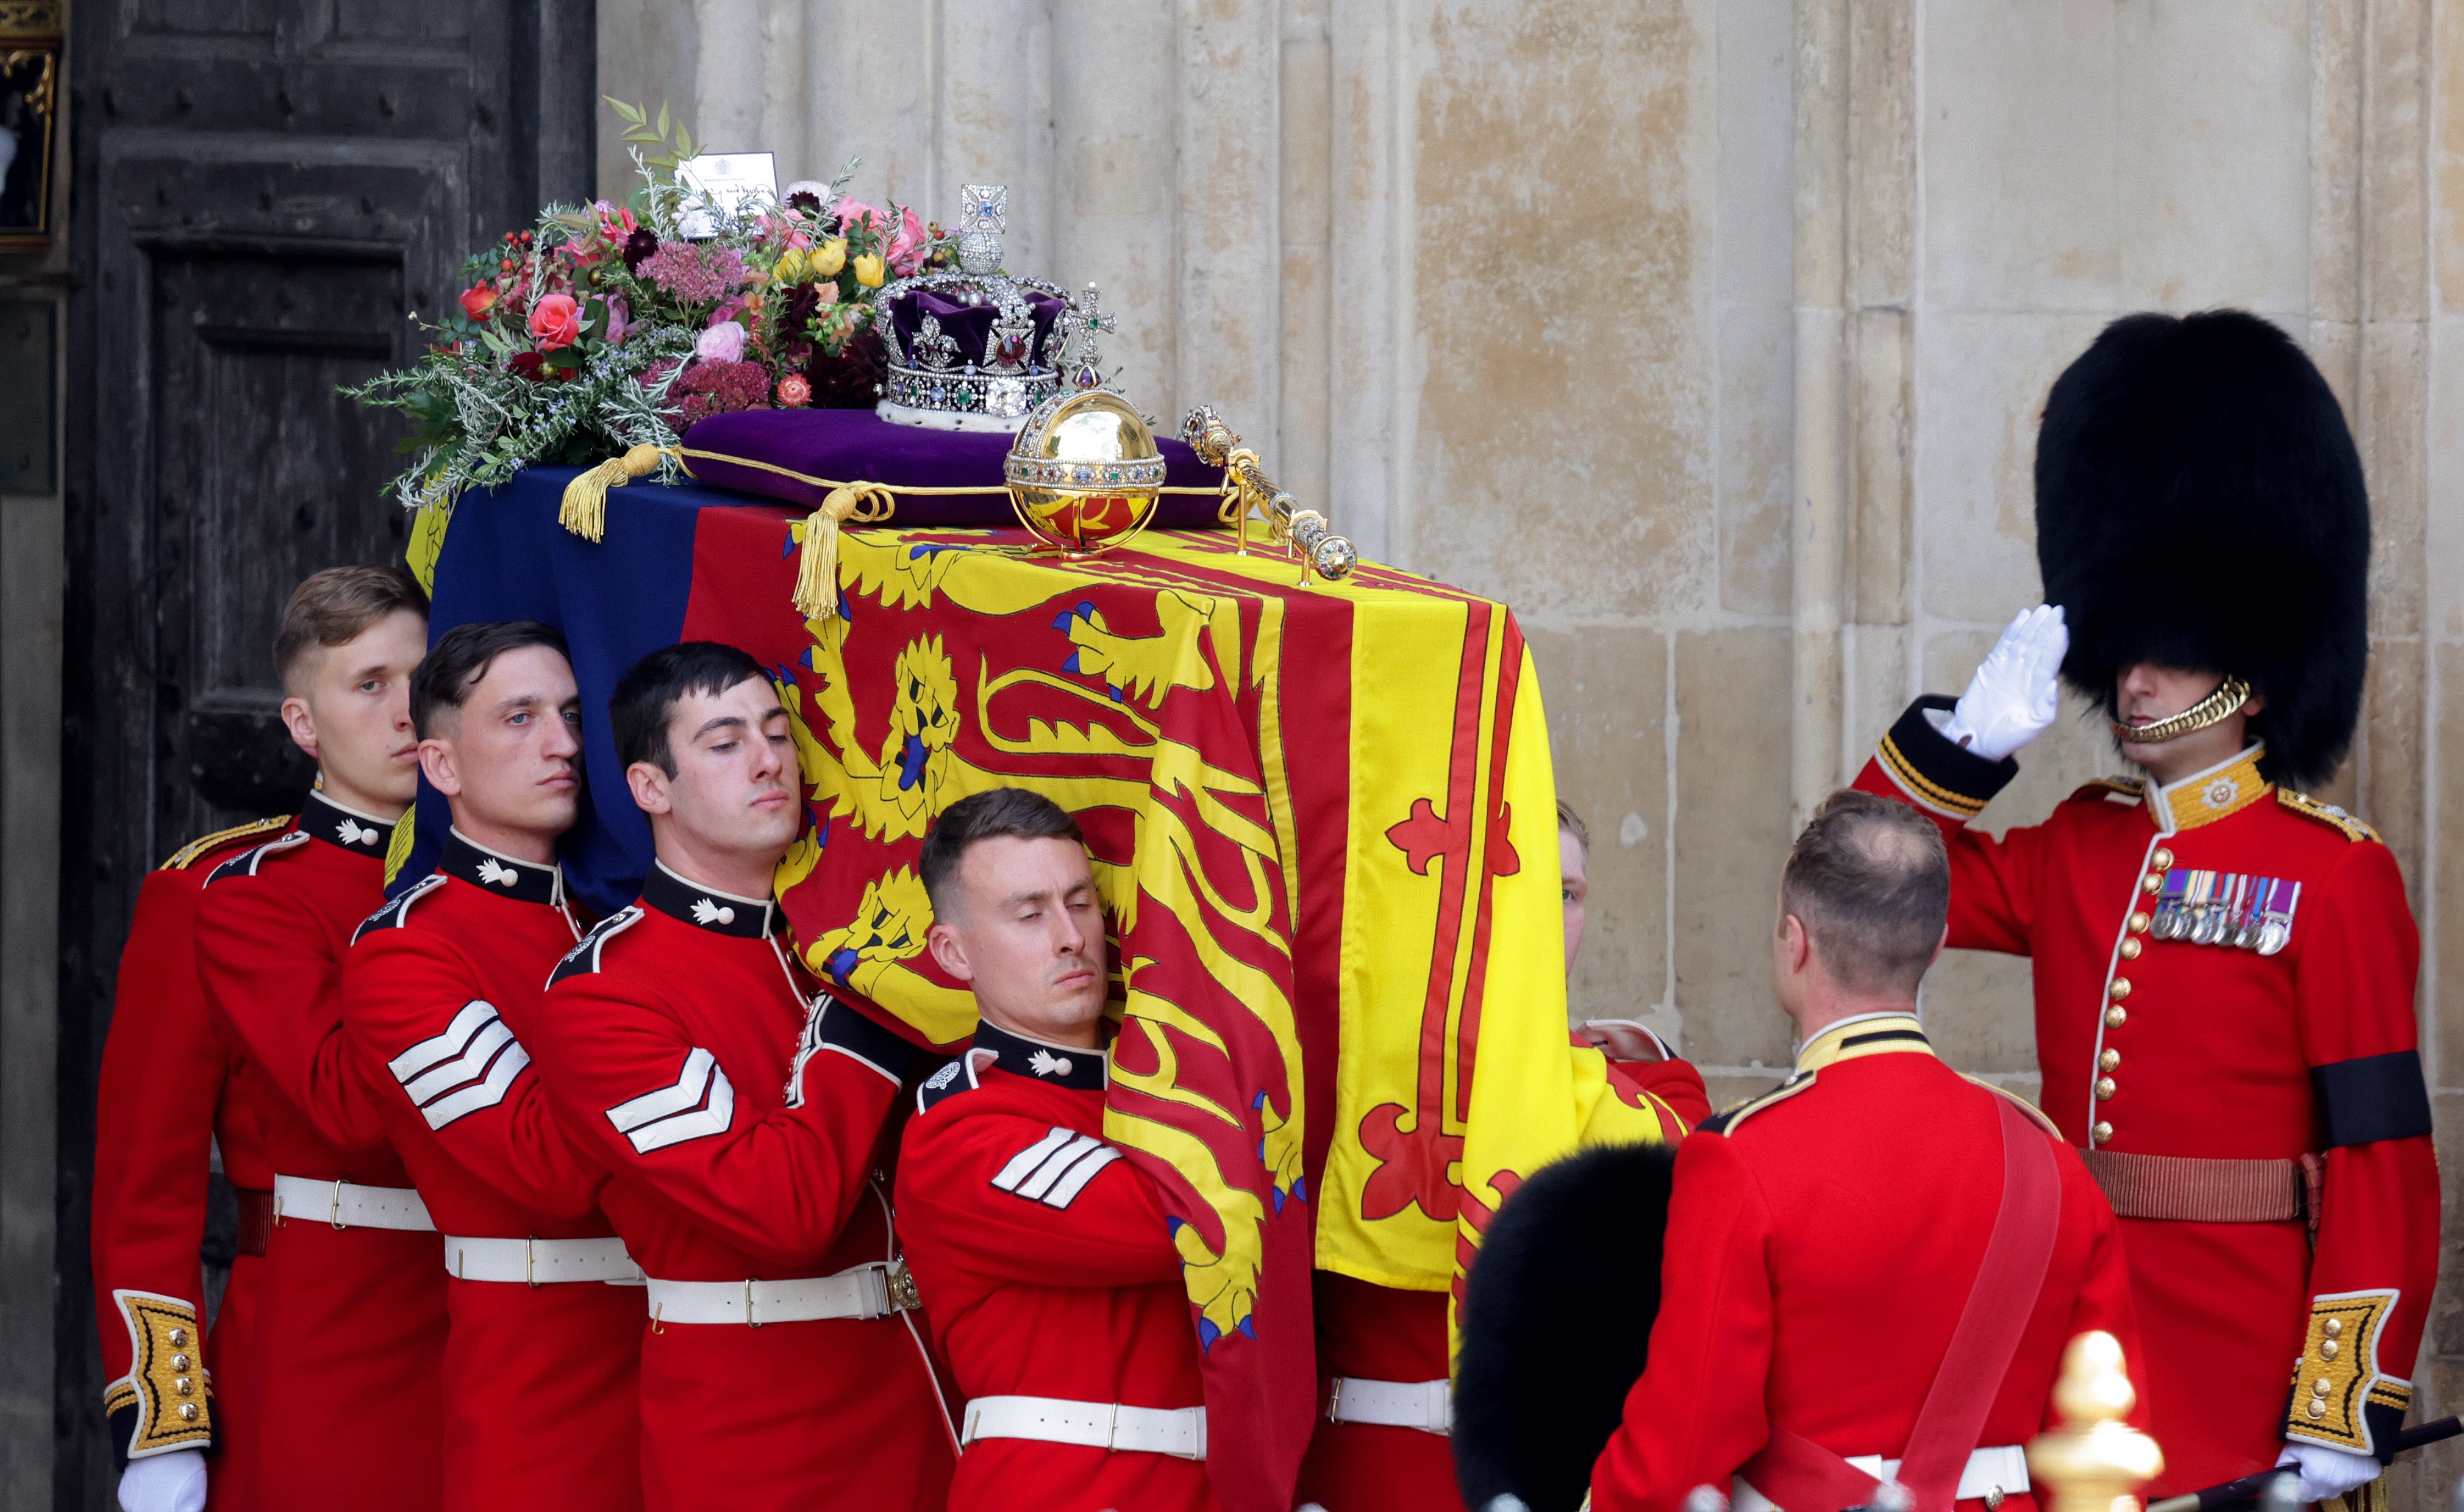 The coffin of Queen Elizabeth II with the Imperial State Crown resting on top is carried by the Bearer Party as it departs Westminster Abbey during the State Funeral on September 19, 2022 in London, England. | Source: Getty Images